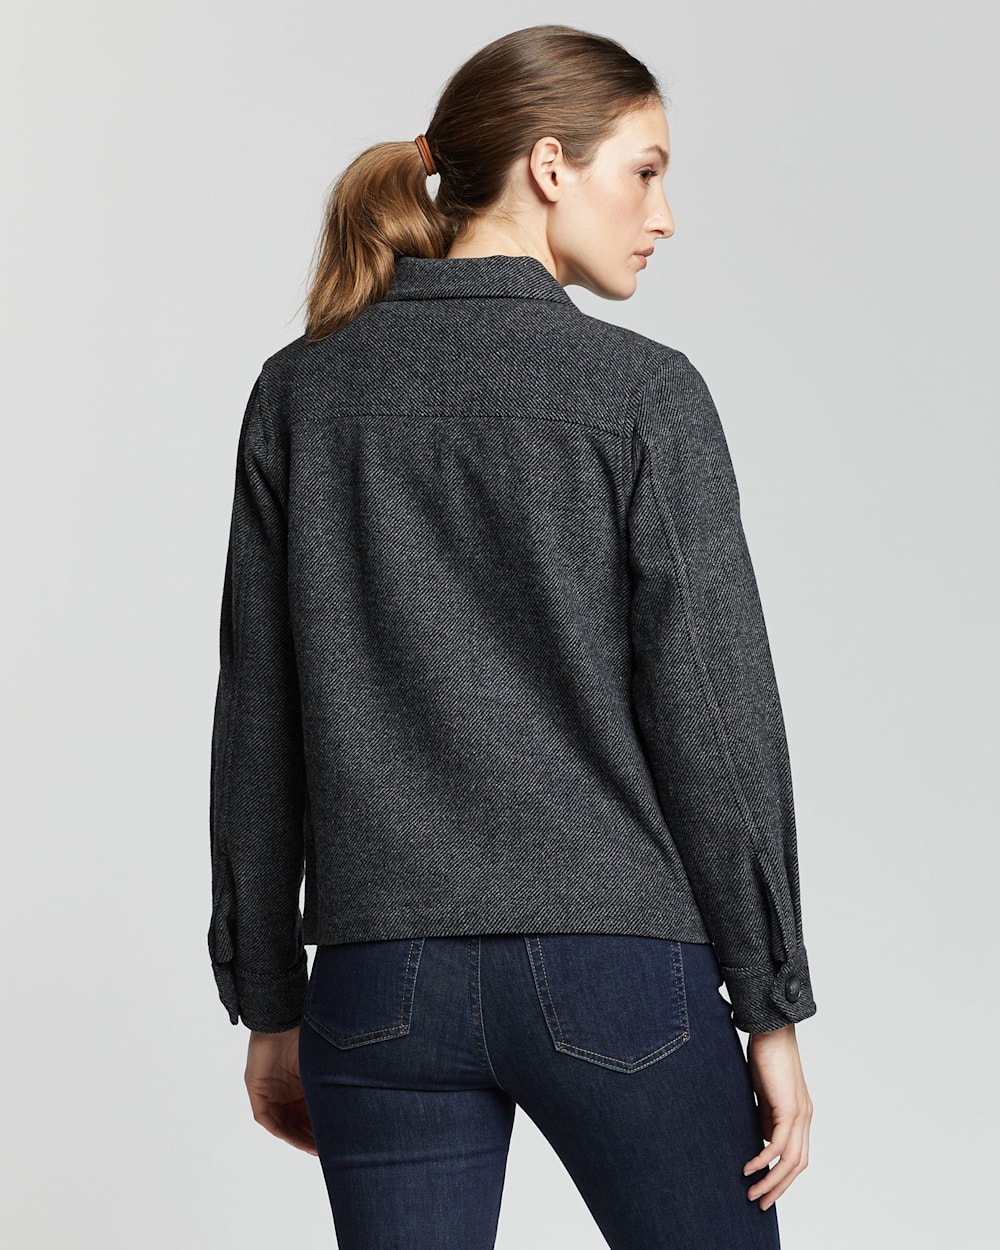 ALTERNATE VIEW OF WOMEN'S WOOL TWILL UTILITY JACKET IN GREY MIX/BLACK image number 3